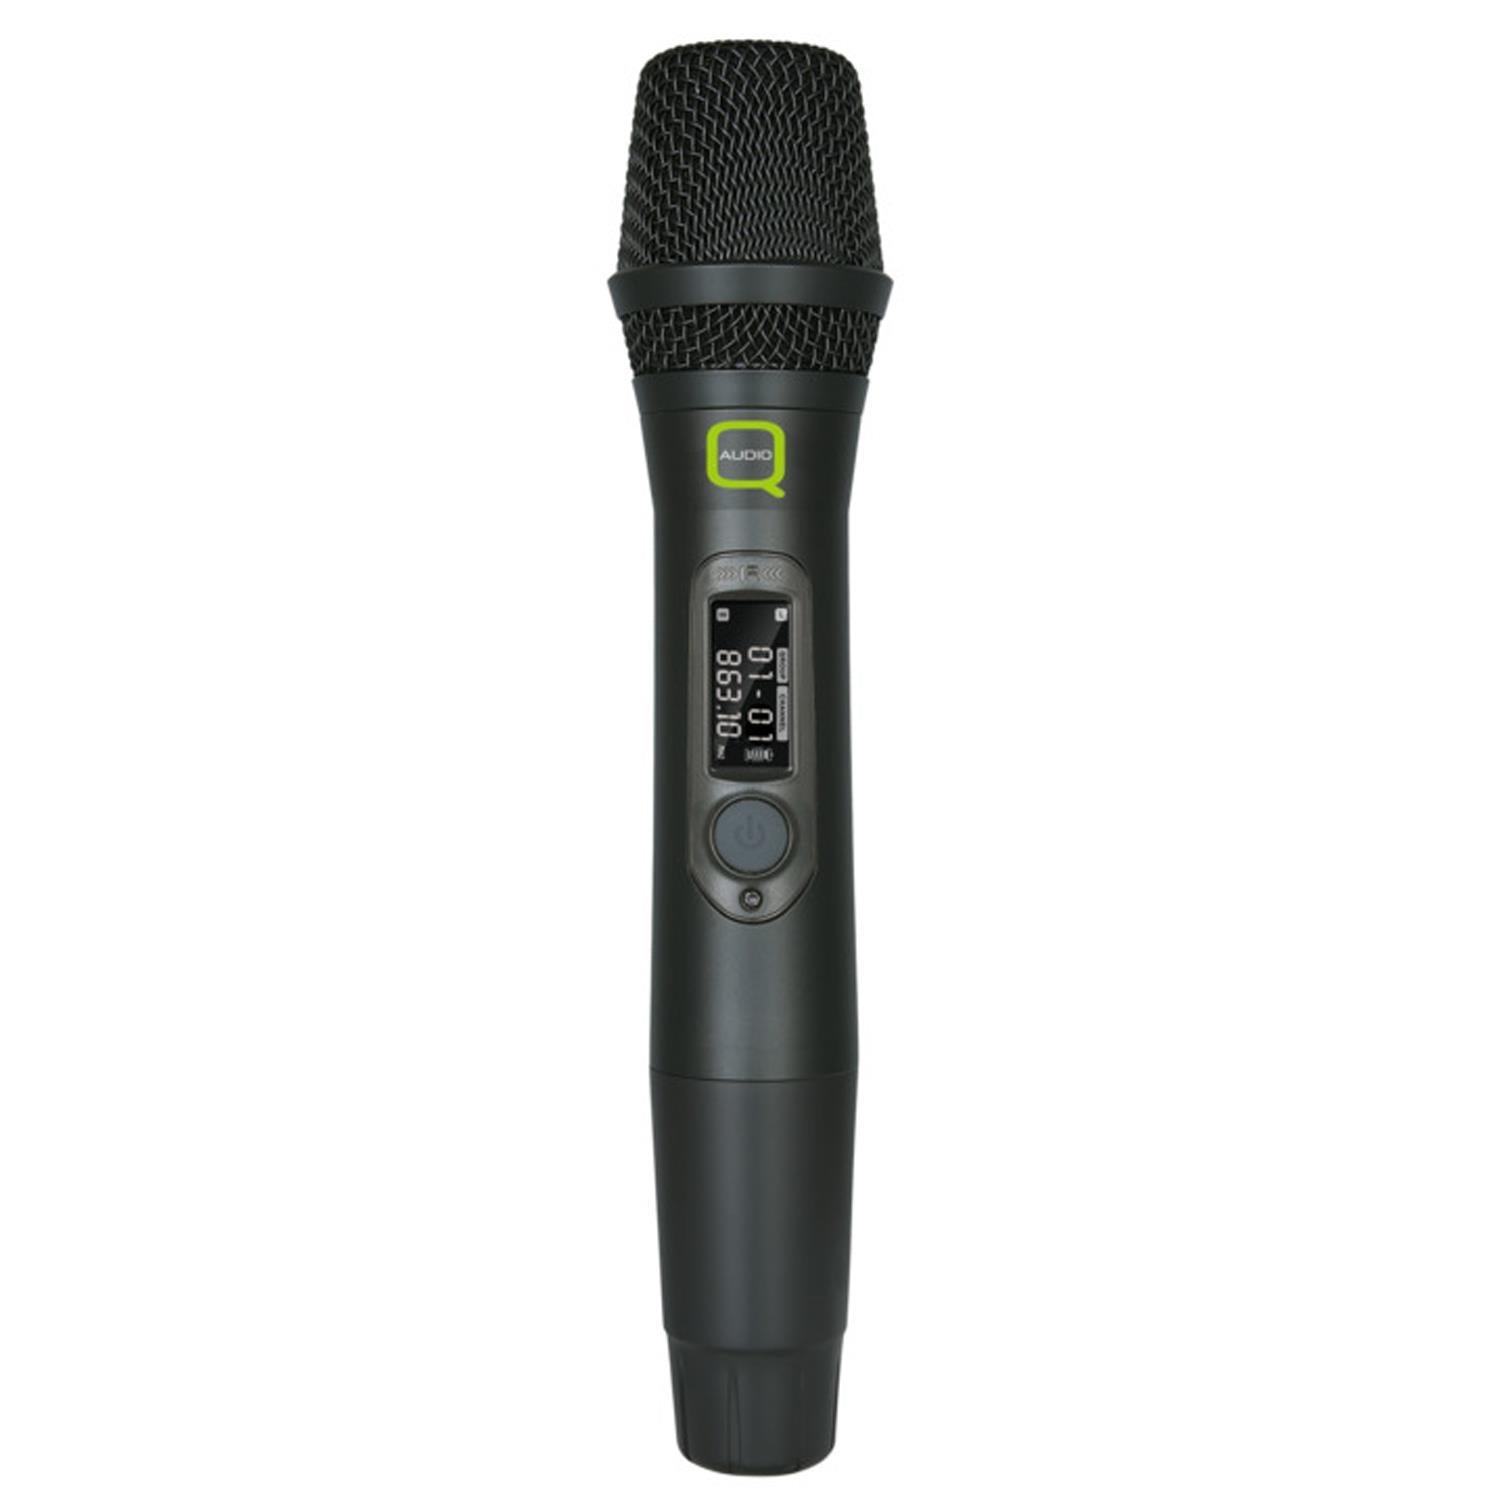 Q-Audio QWM1950 TH Replacement UHF Handheld Microphone Transmitter (863-865 MHz) - DY Pro Audio